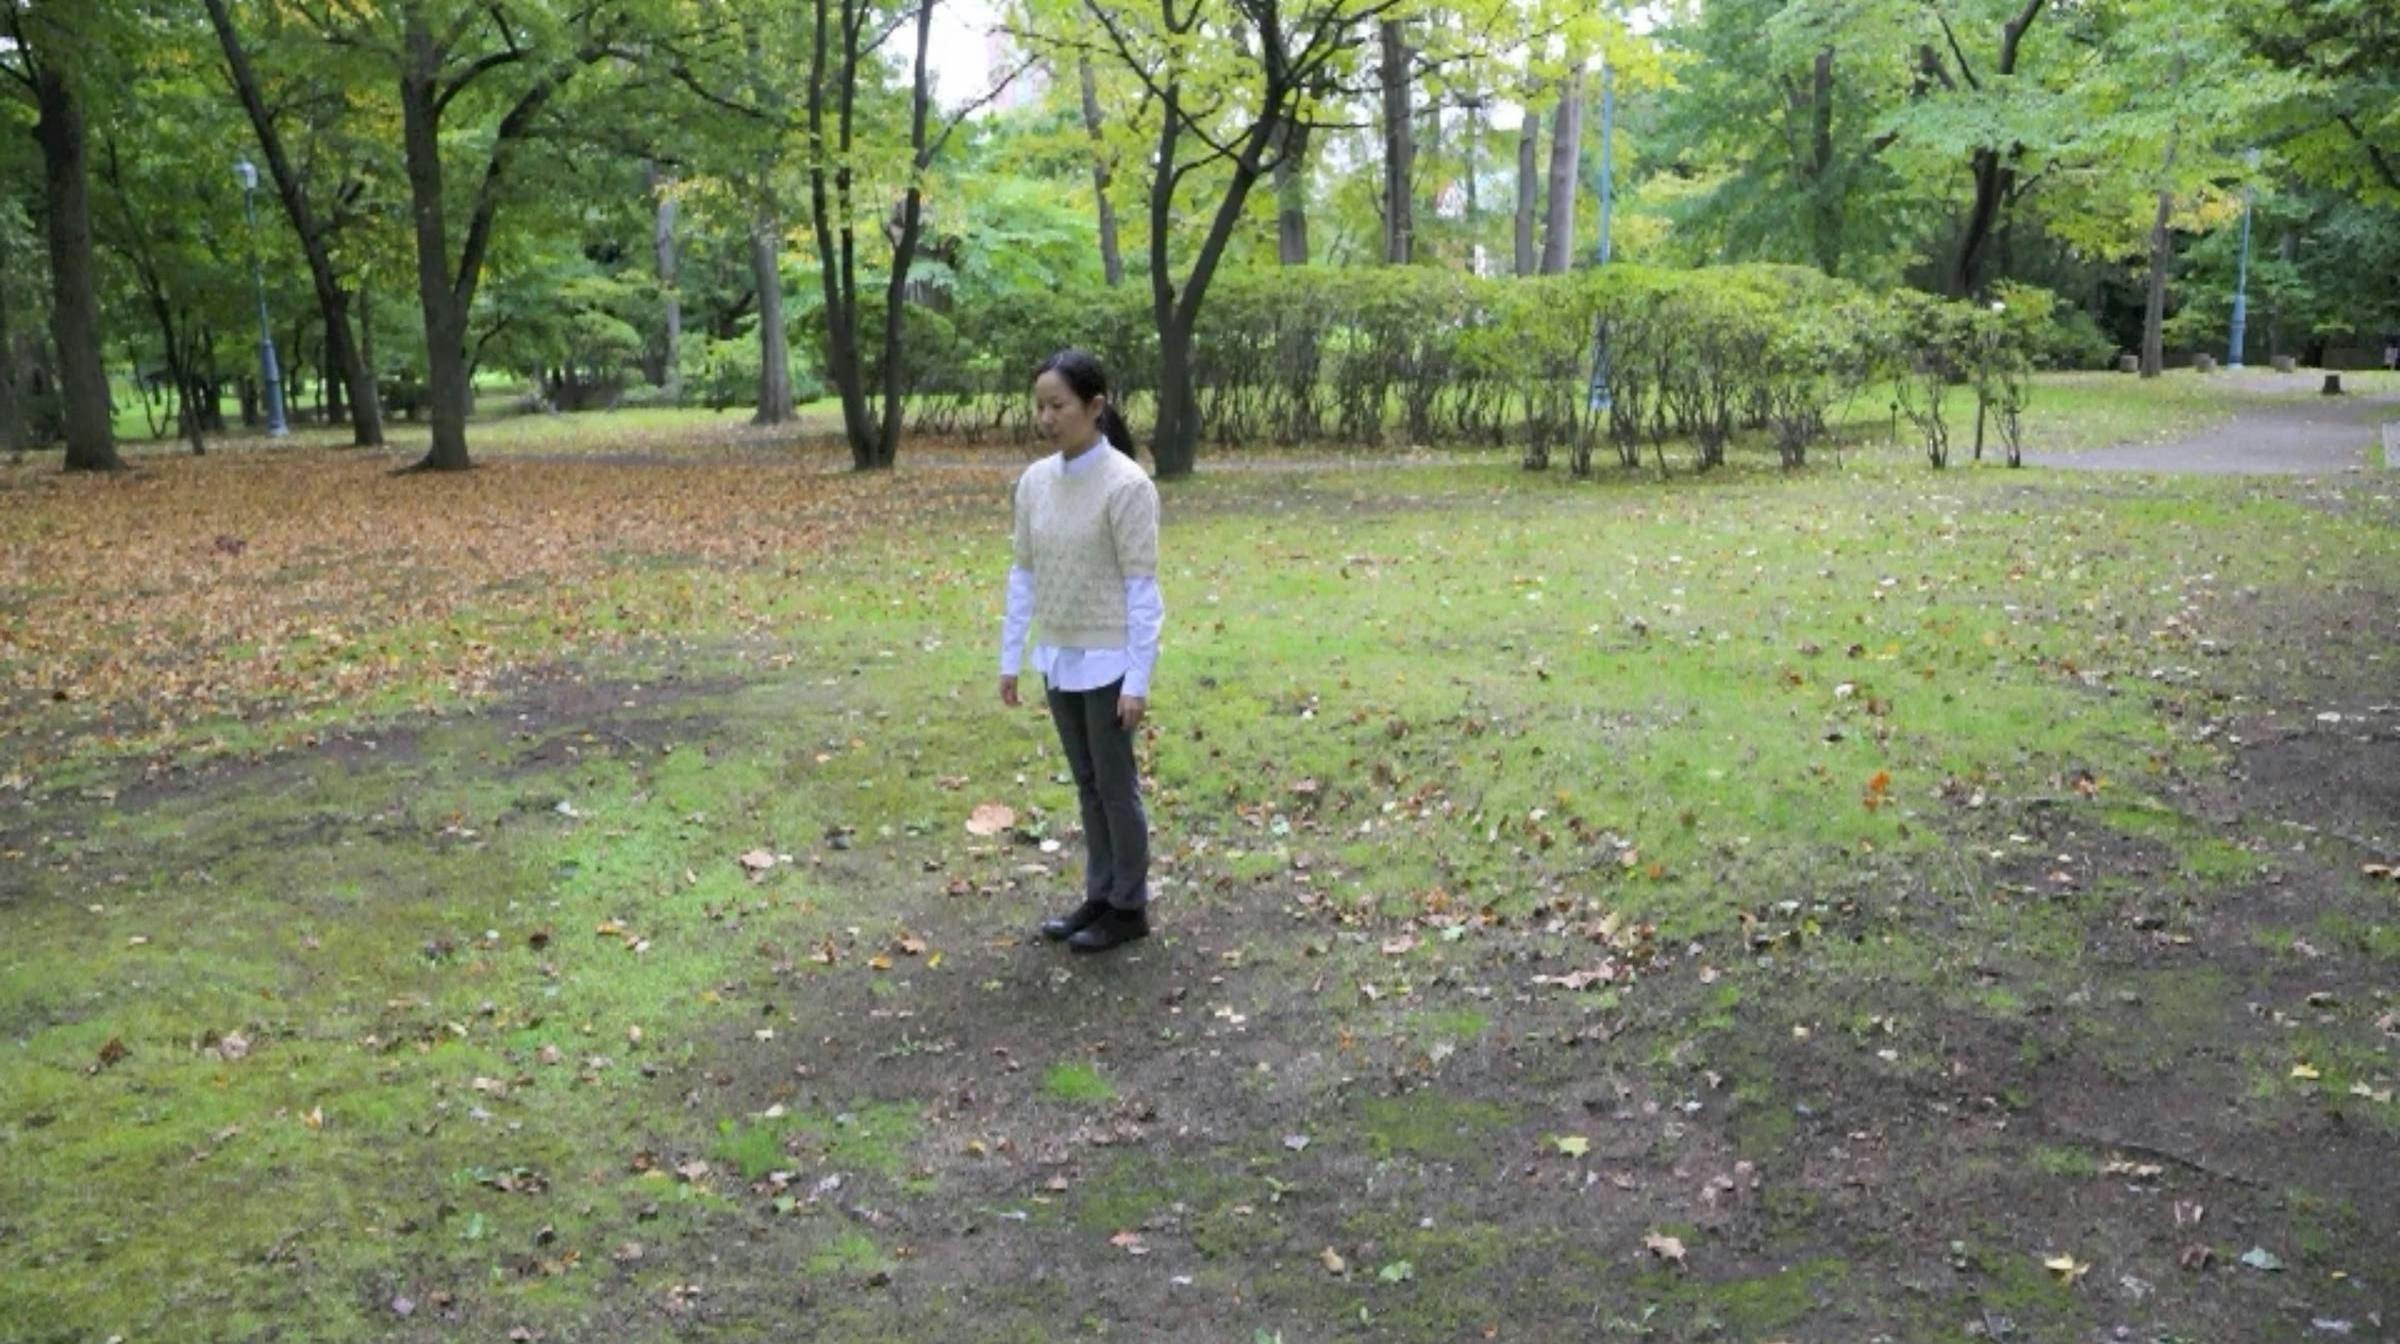 A person stands with their arms down by their sides in a grassy area with trees around them. They are wearing a white shirt with a cream t-shirt on top.